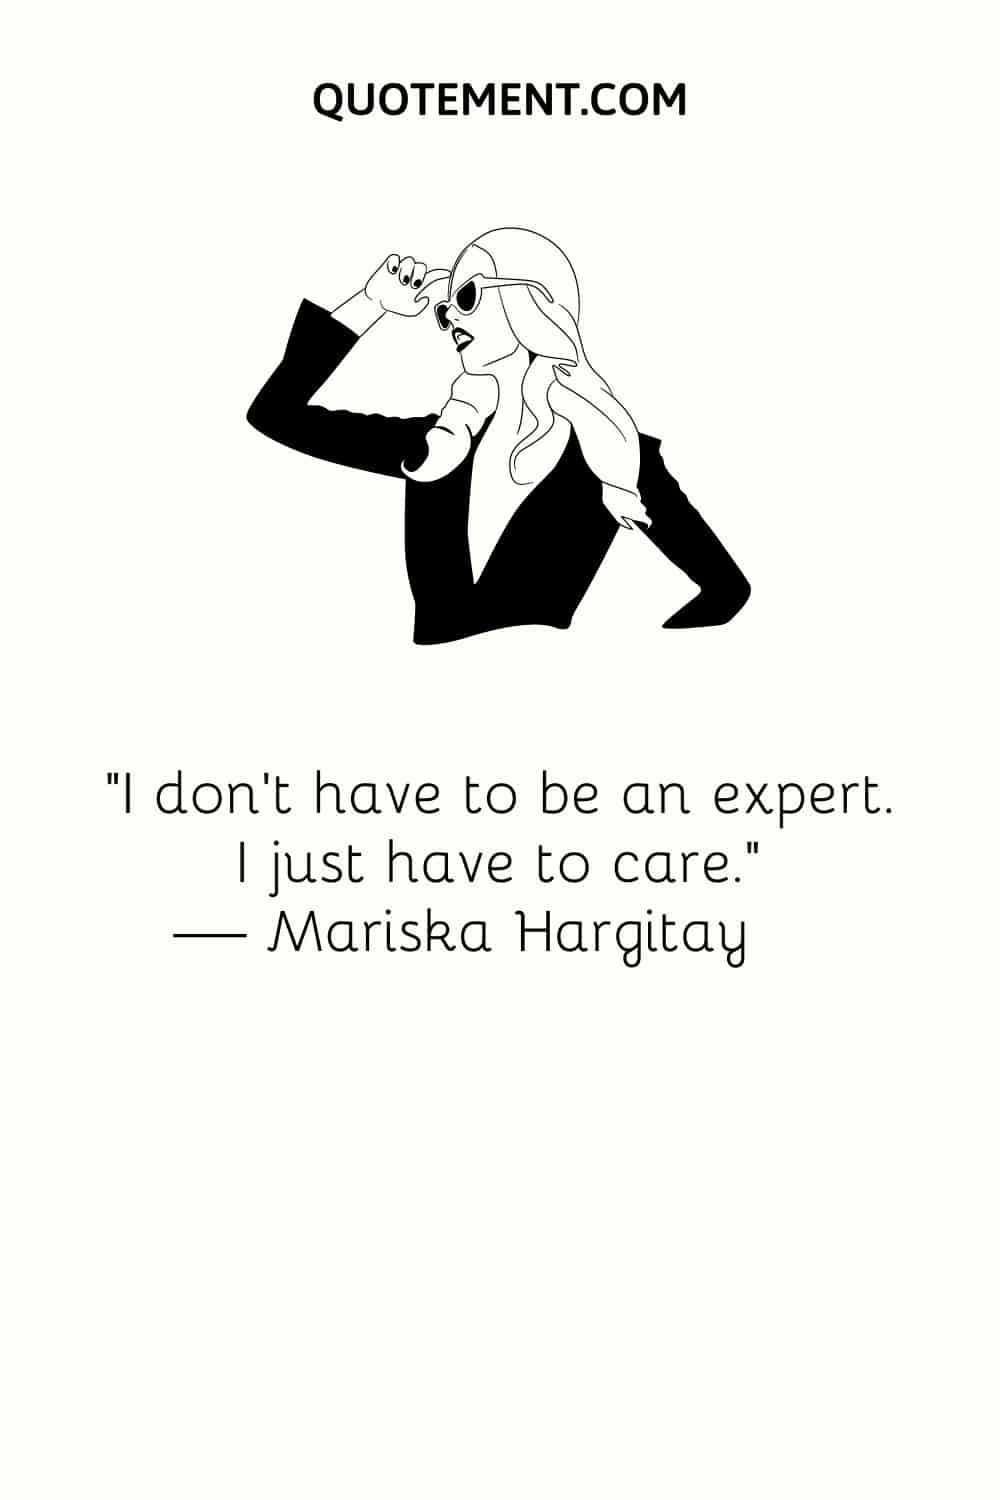 “I don’t have to be an expert. I just have to care.” — Mariska Hargitay